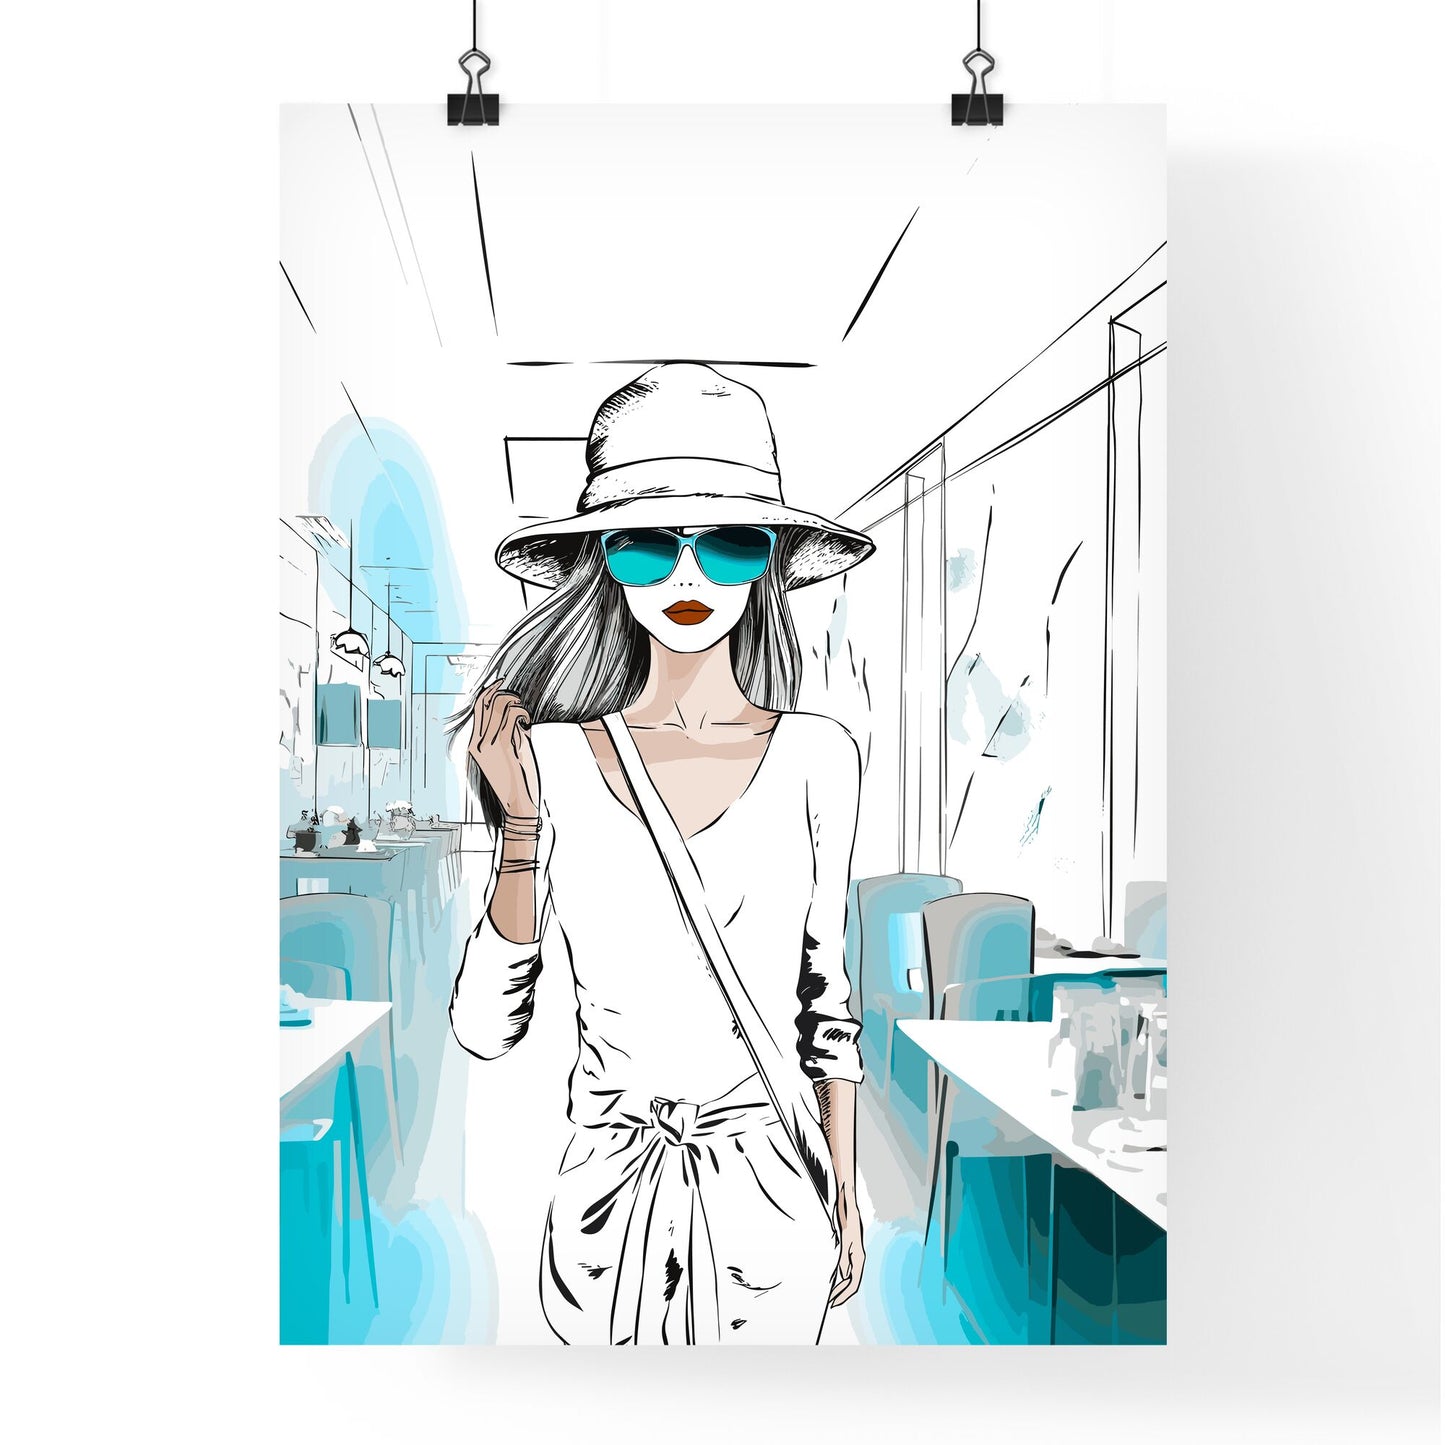 Lifestyle Fashion Illustration In The Coffee Bar - A Woman Wearing A Hat And Sunglasses Default Title